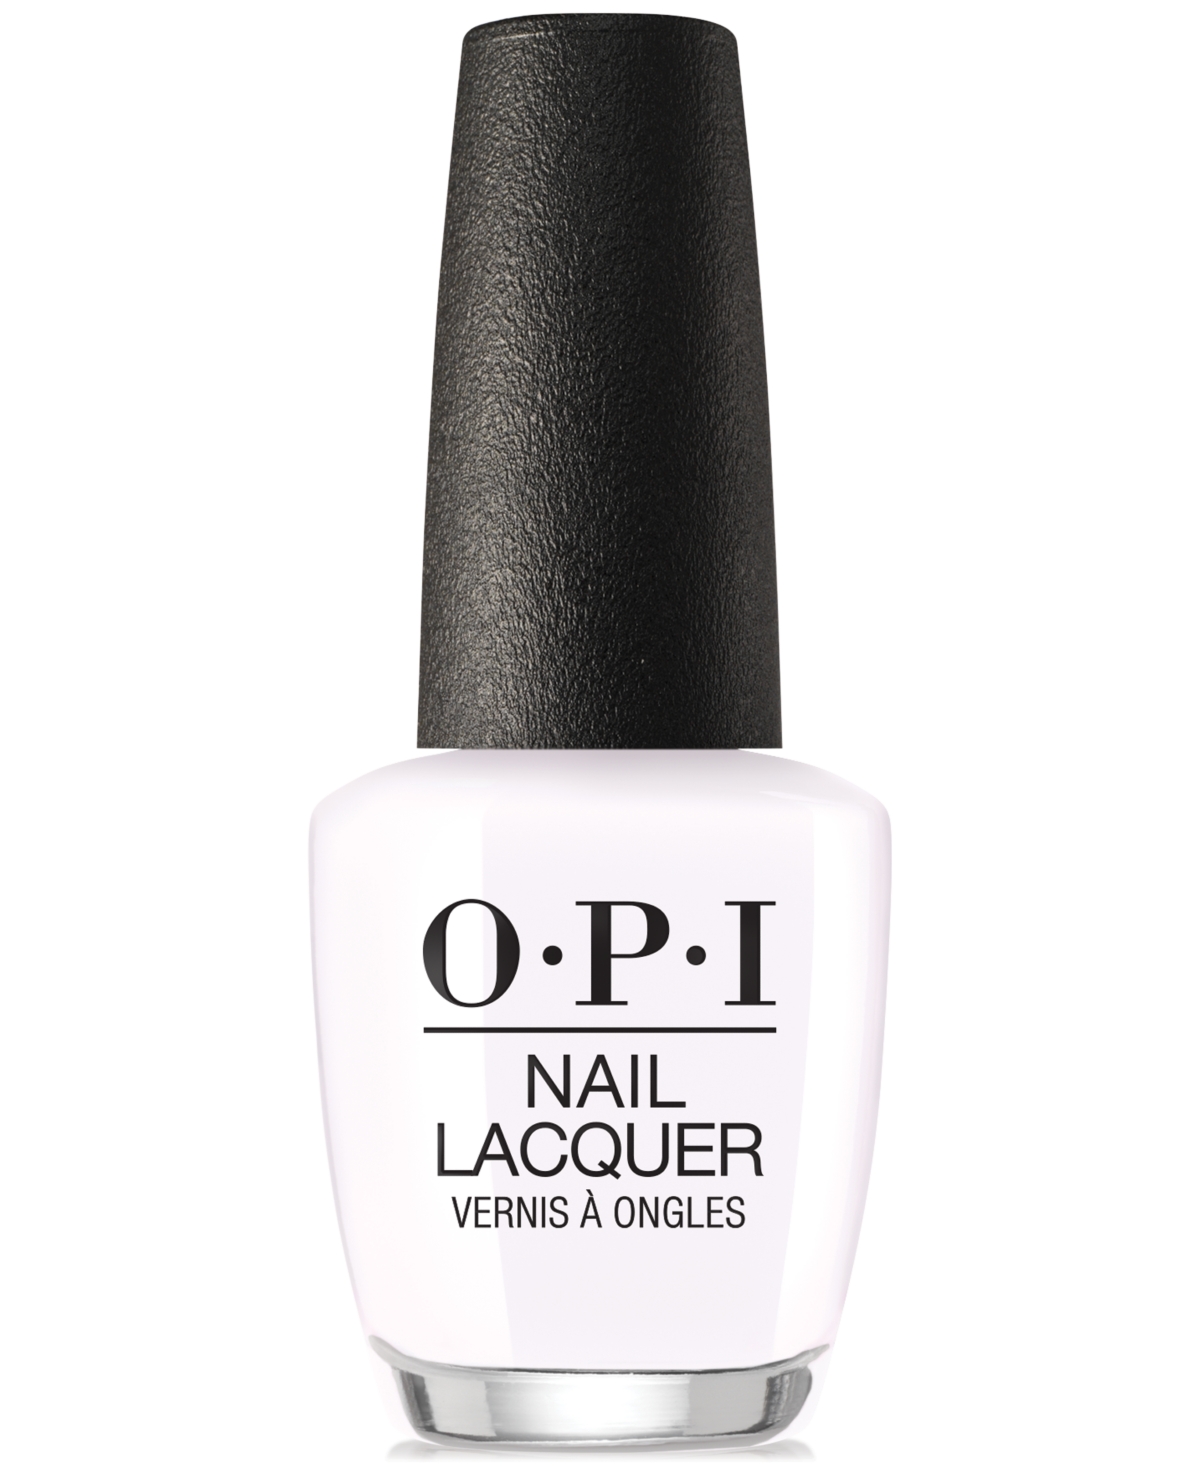 Opi Nail Lacquer In Suzi Chases Portu-geese